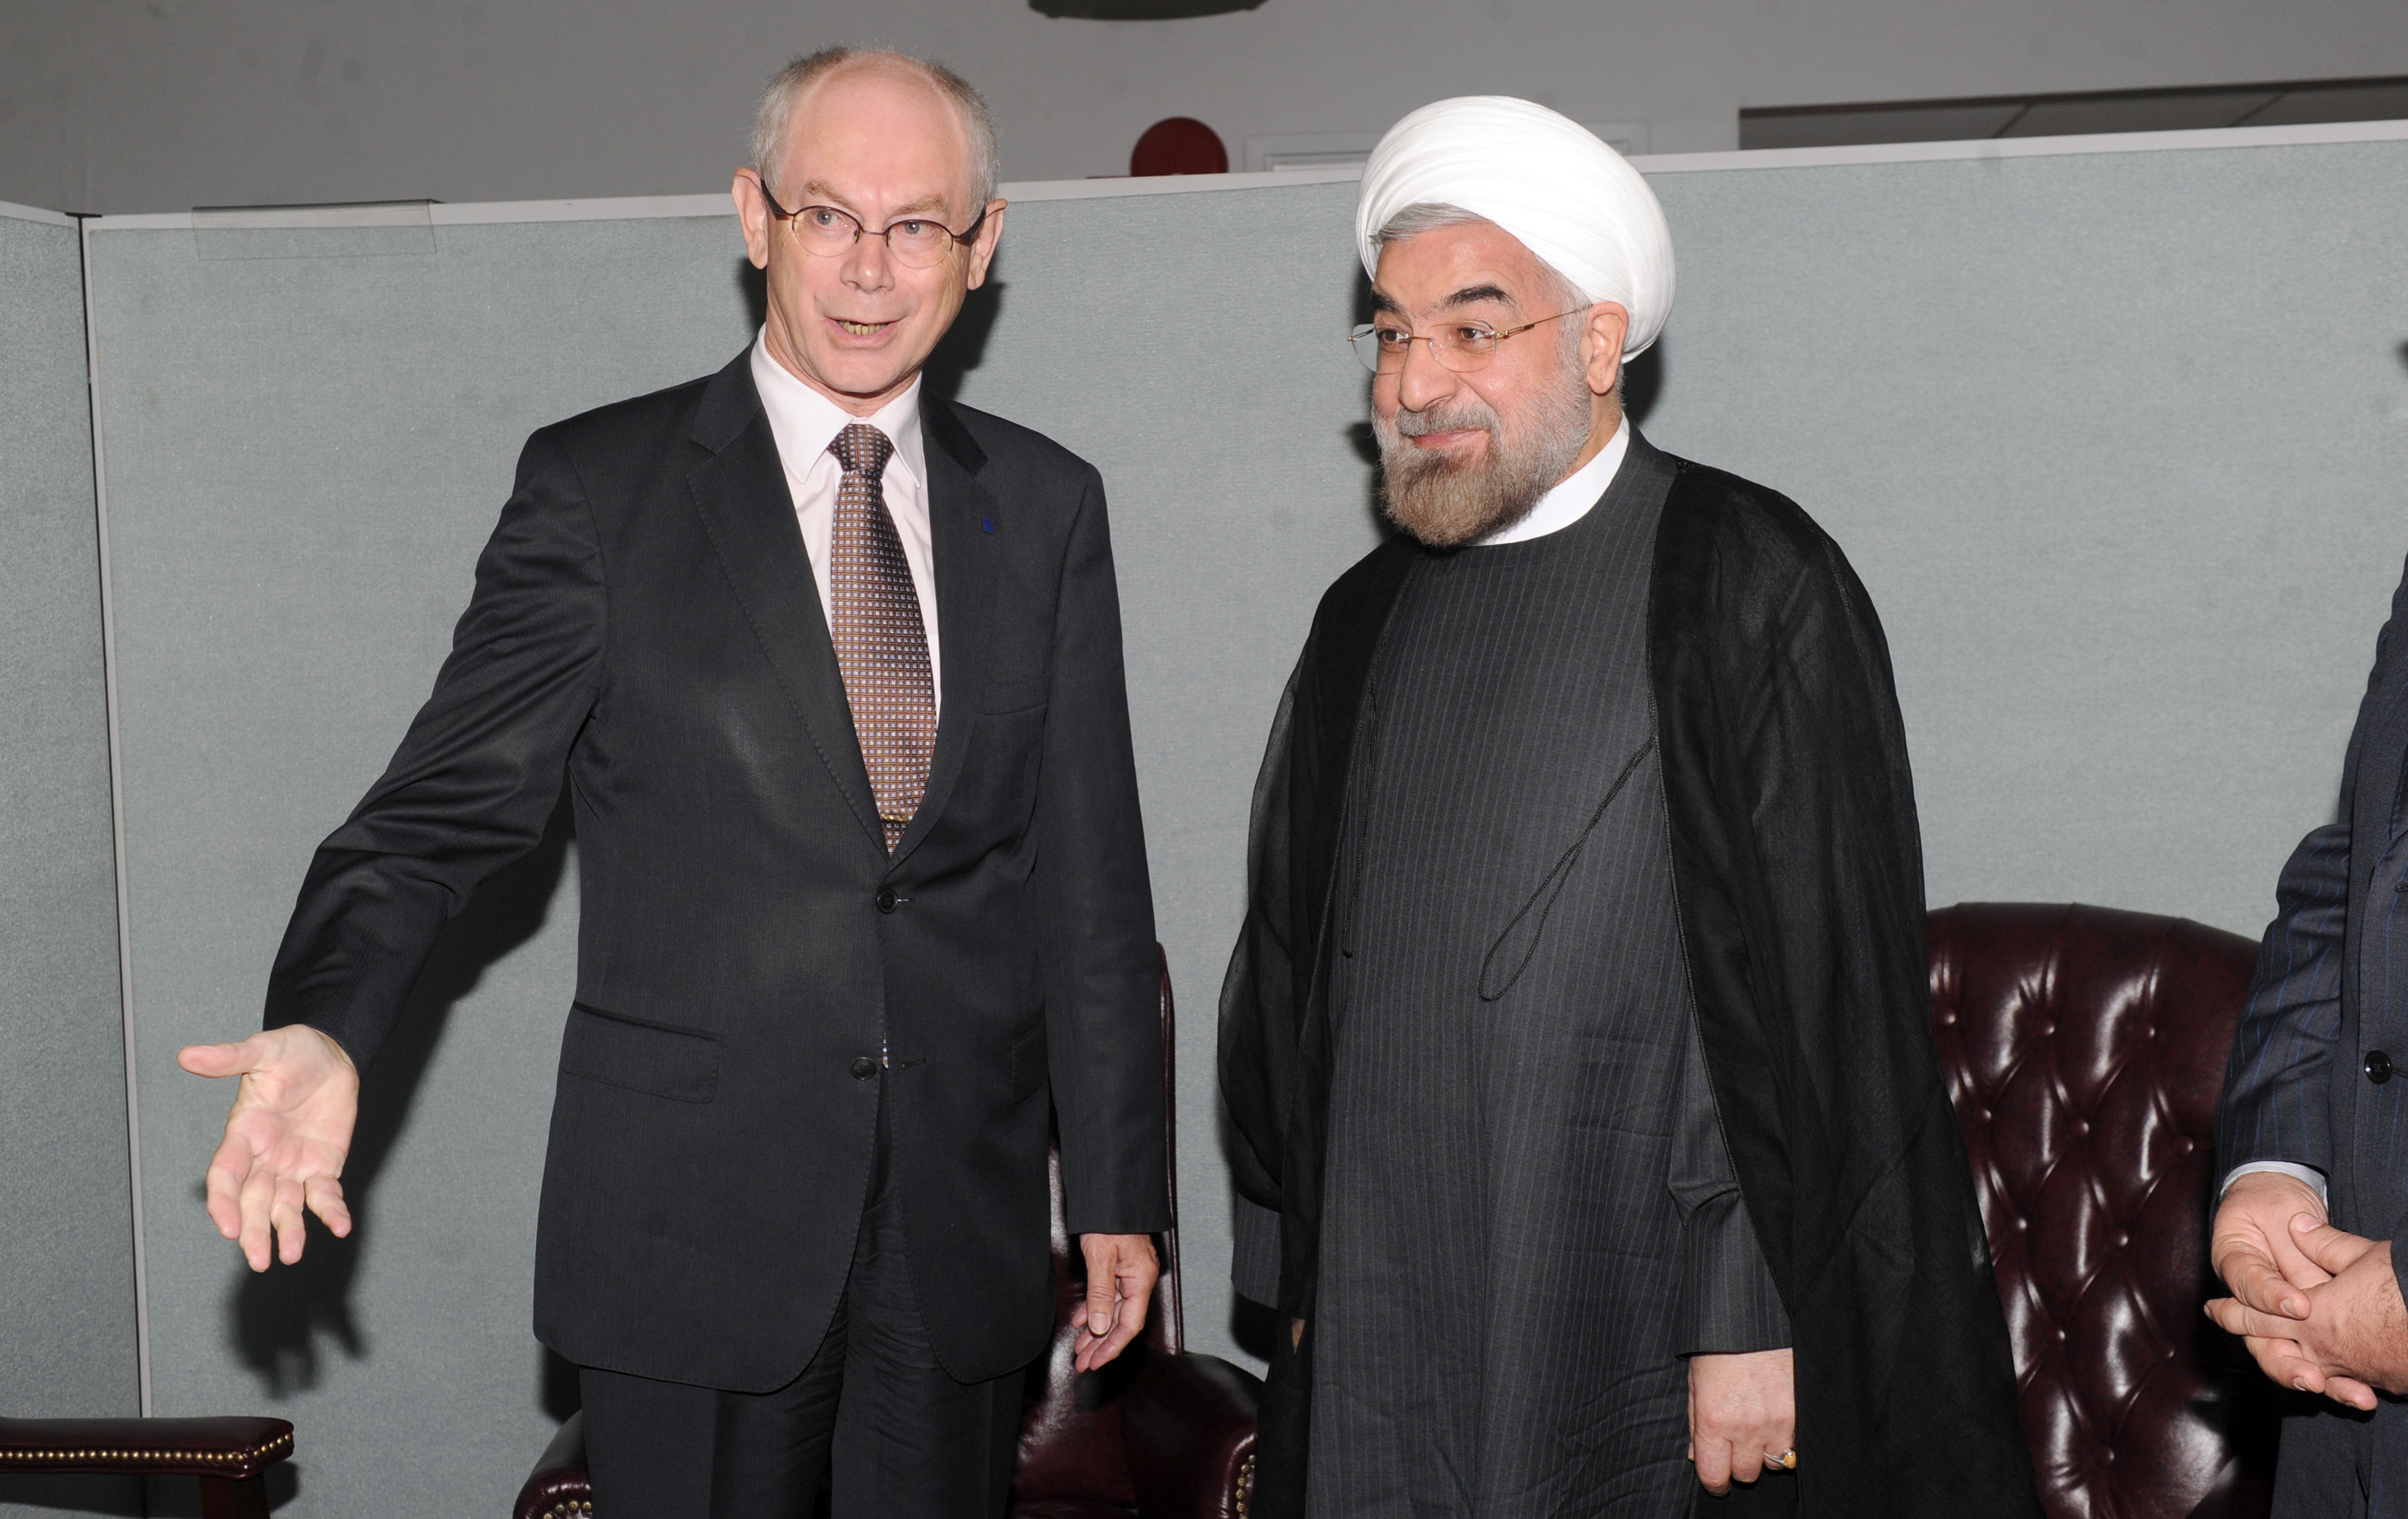 President Hassan Rouhani of Iran (photo credit: European External Action Service/flickr)